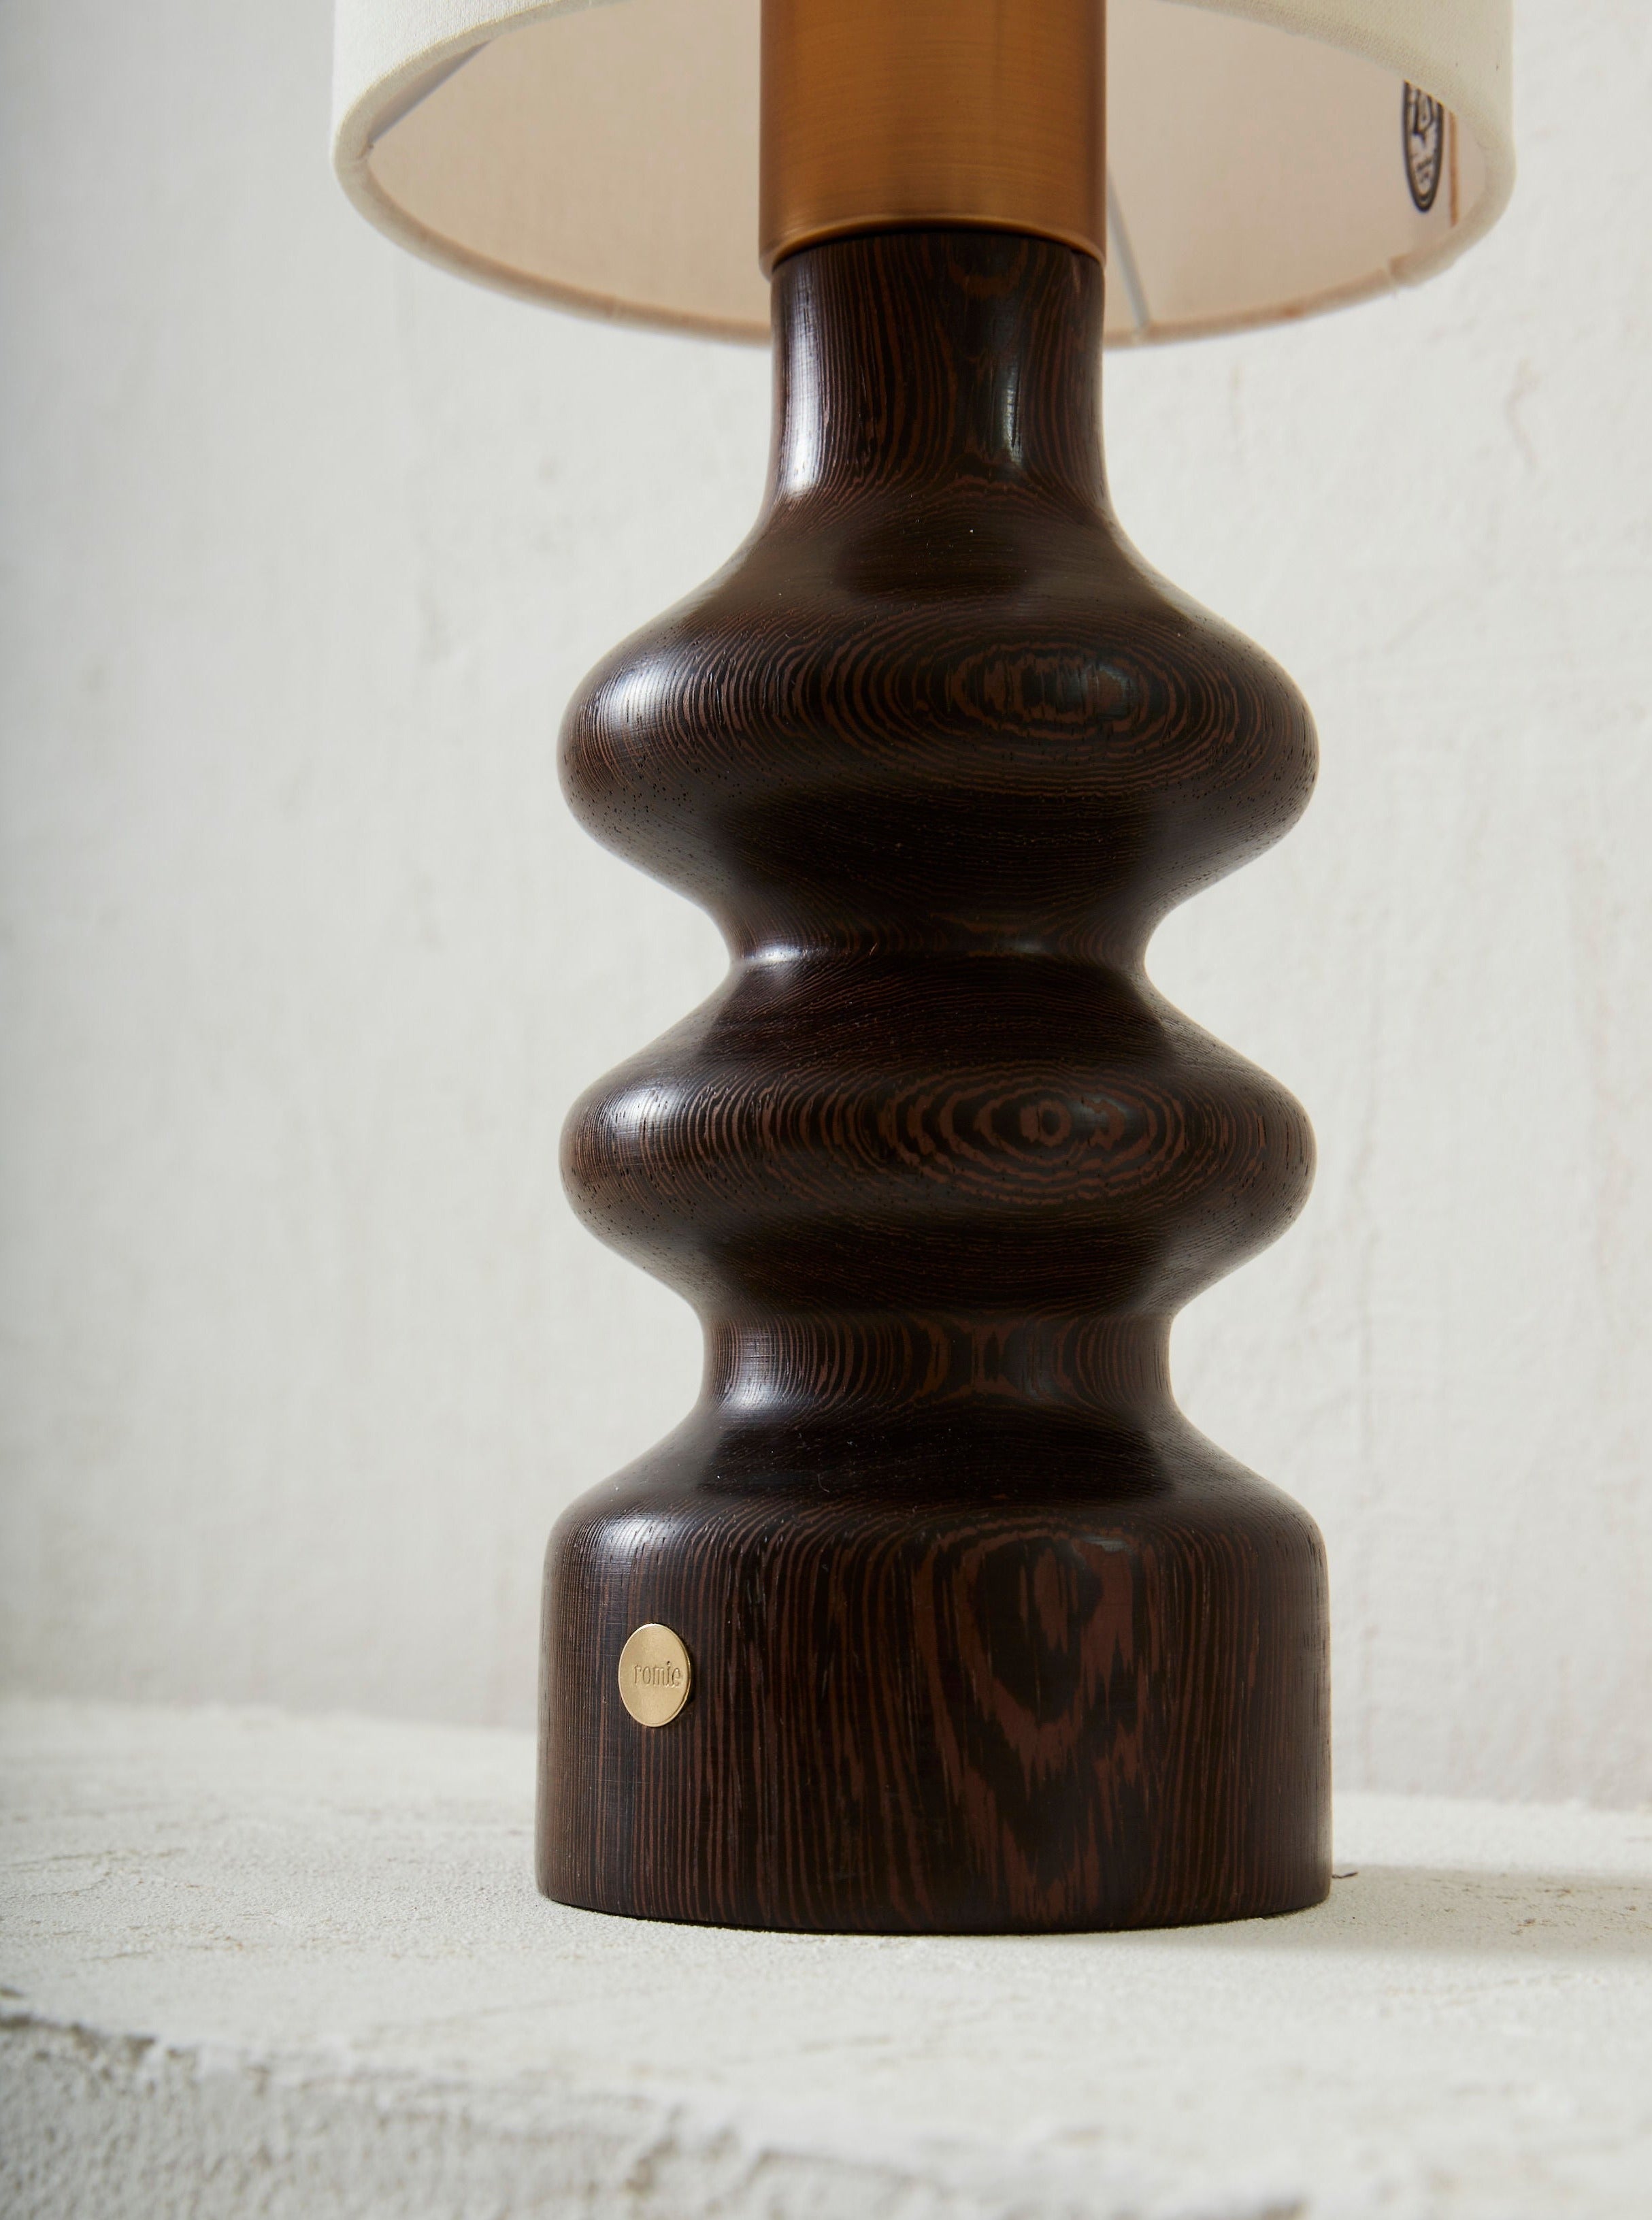 Close-up of a dark wenge grain textured Romie Objetti Alma Wengé Lamp base with a smooth, curvy design, featuring a small, round, brass-colored brand plaque on its lower portion. A cream lampshade is.